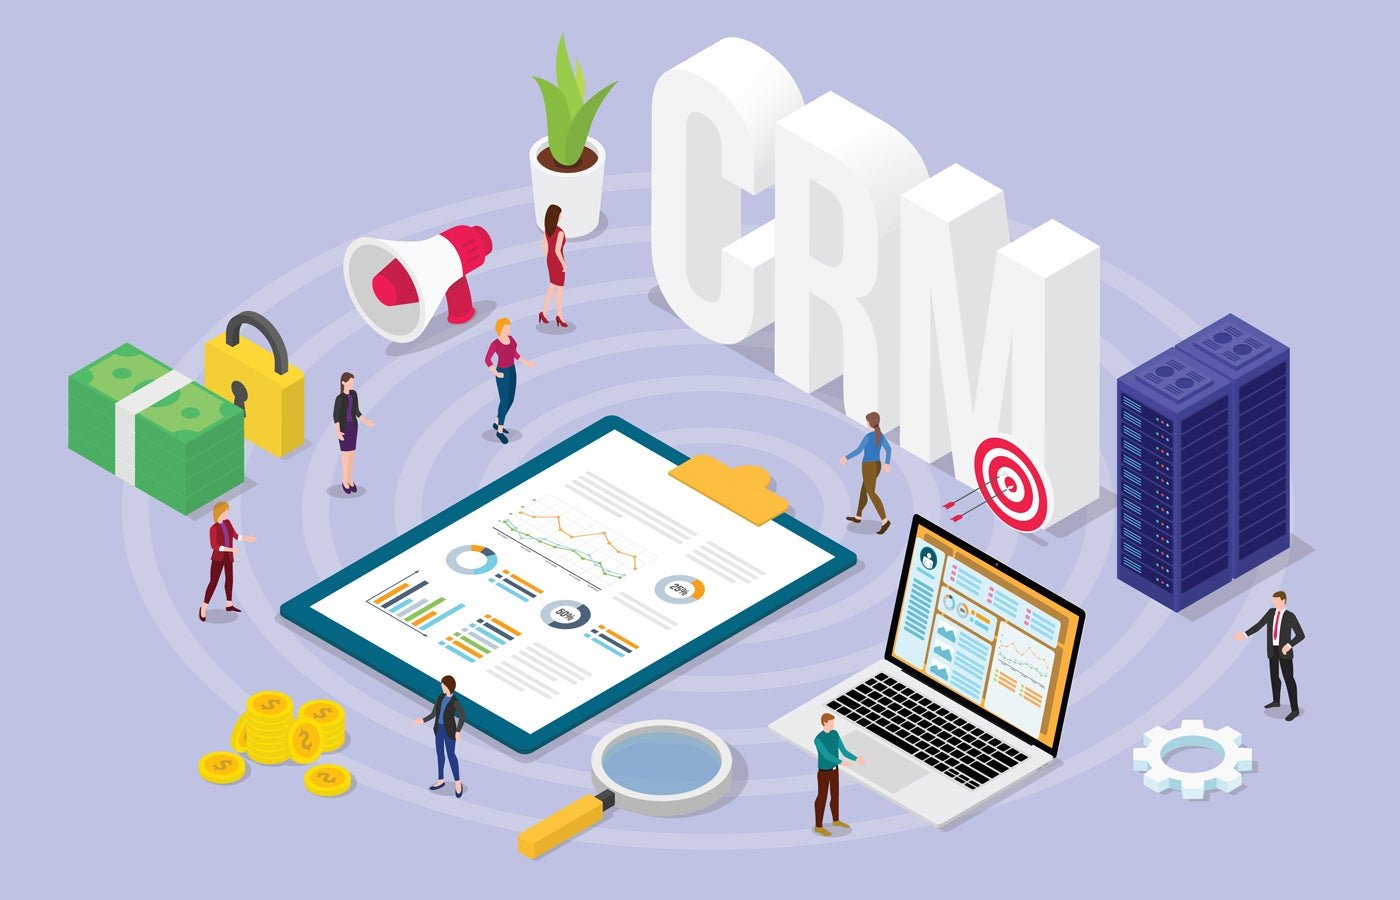 5 Benefits of CRM Software to Businesses